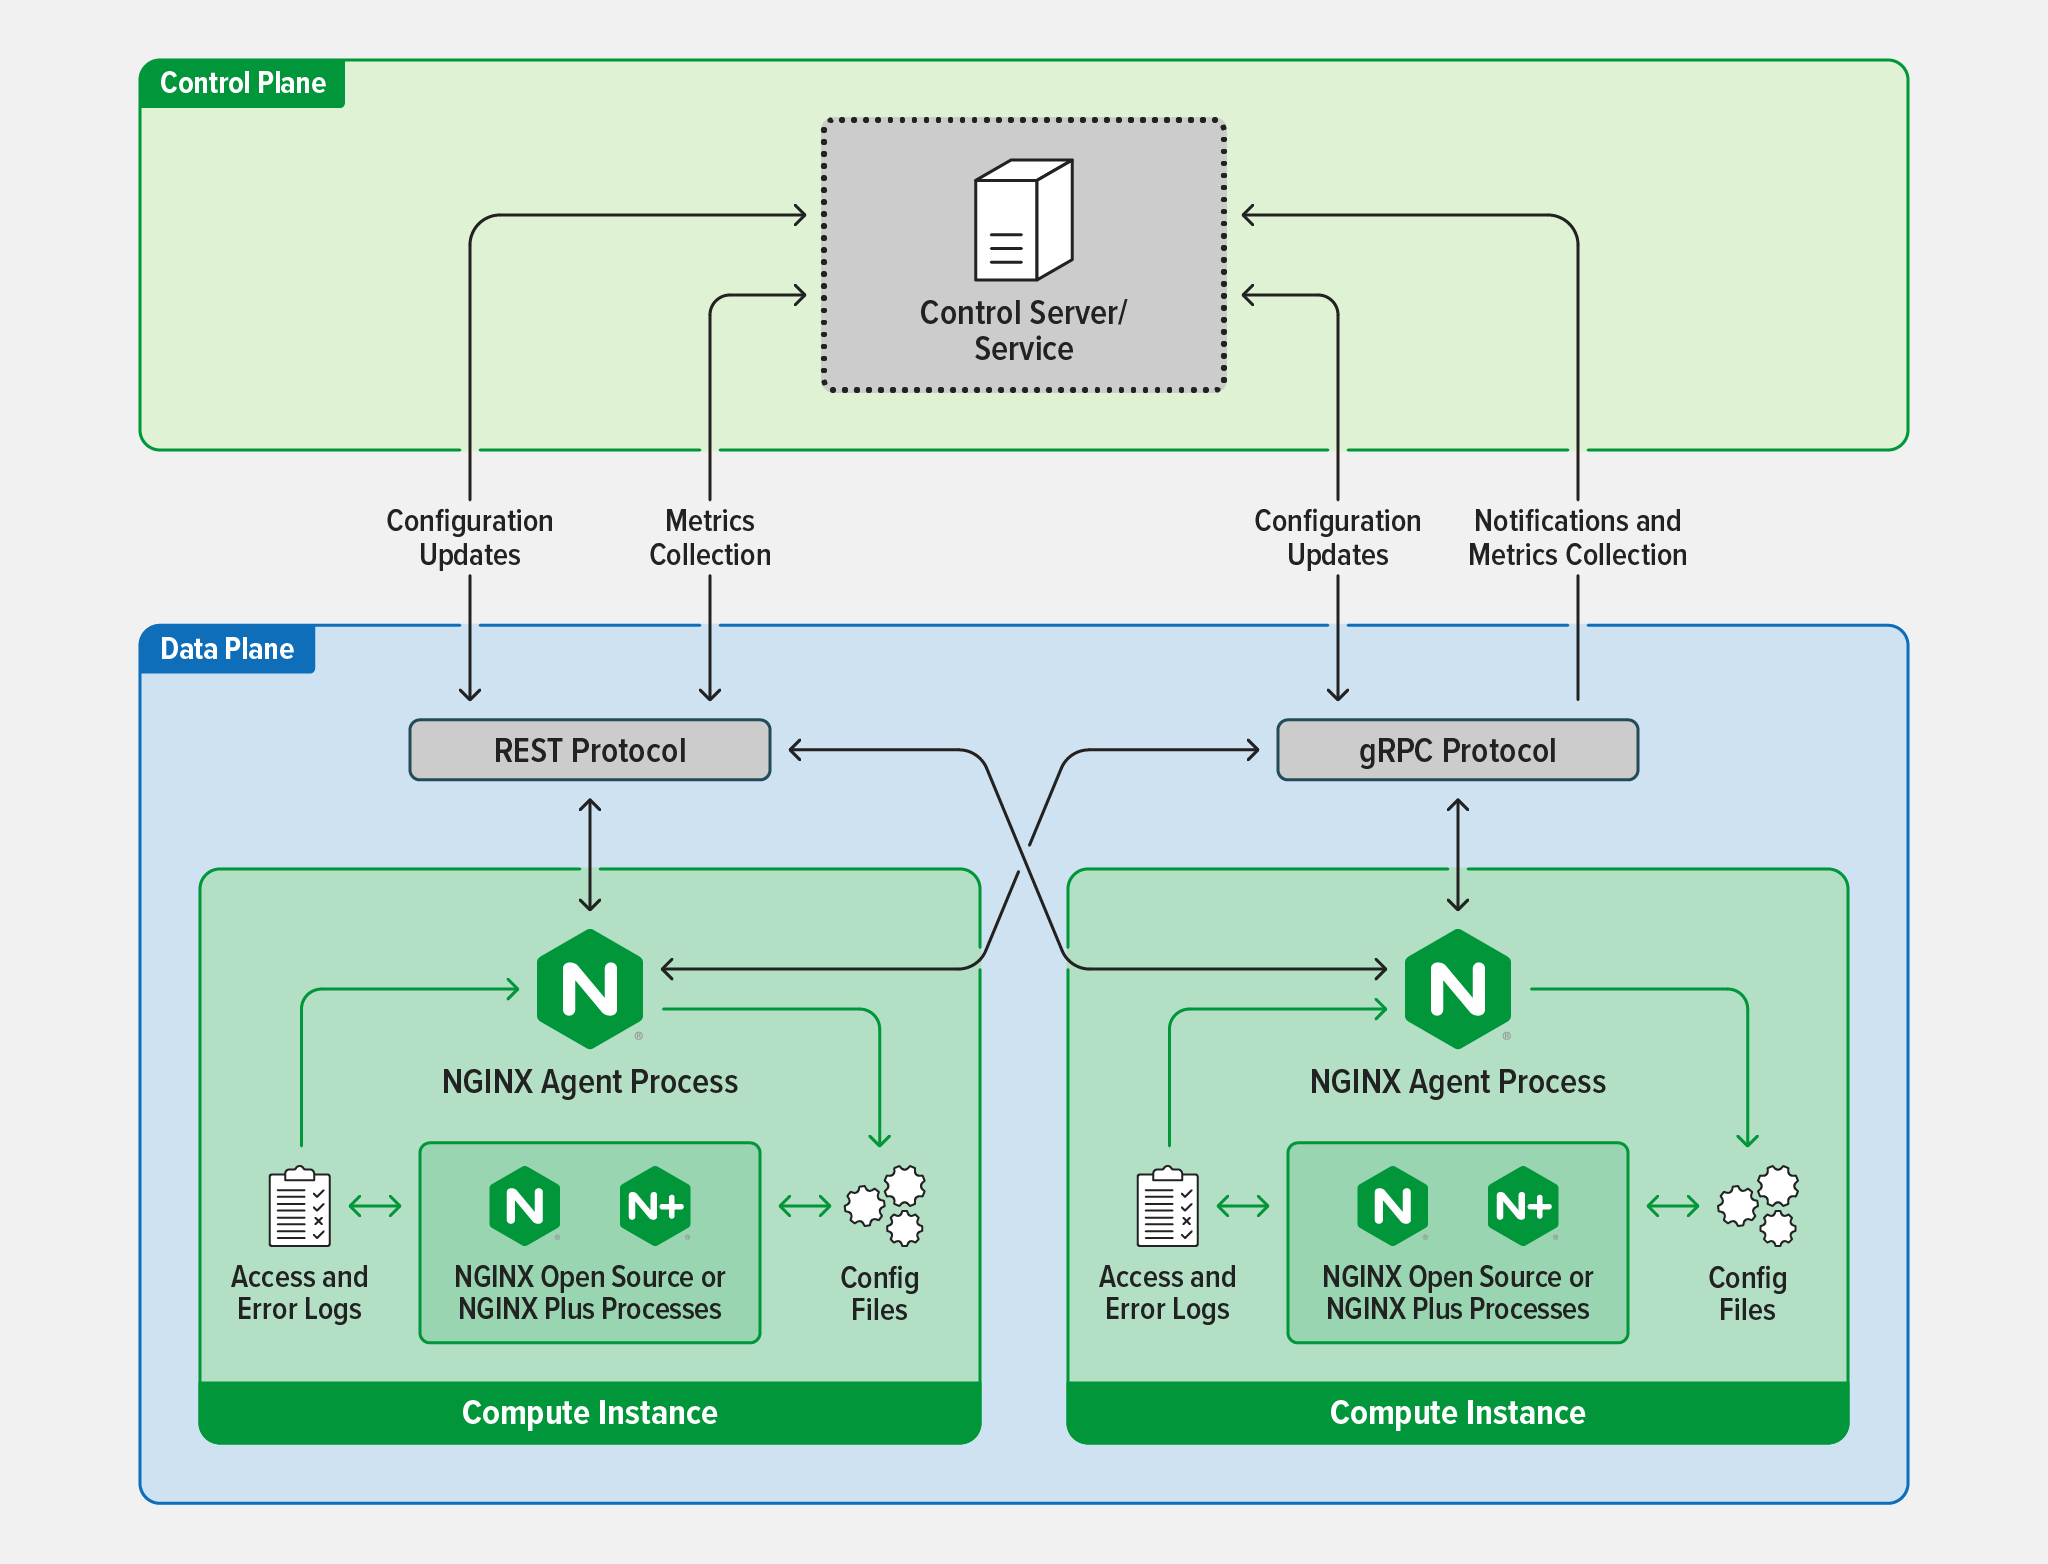 How NGINX Agent works